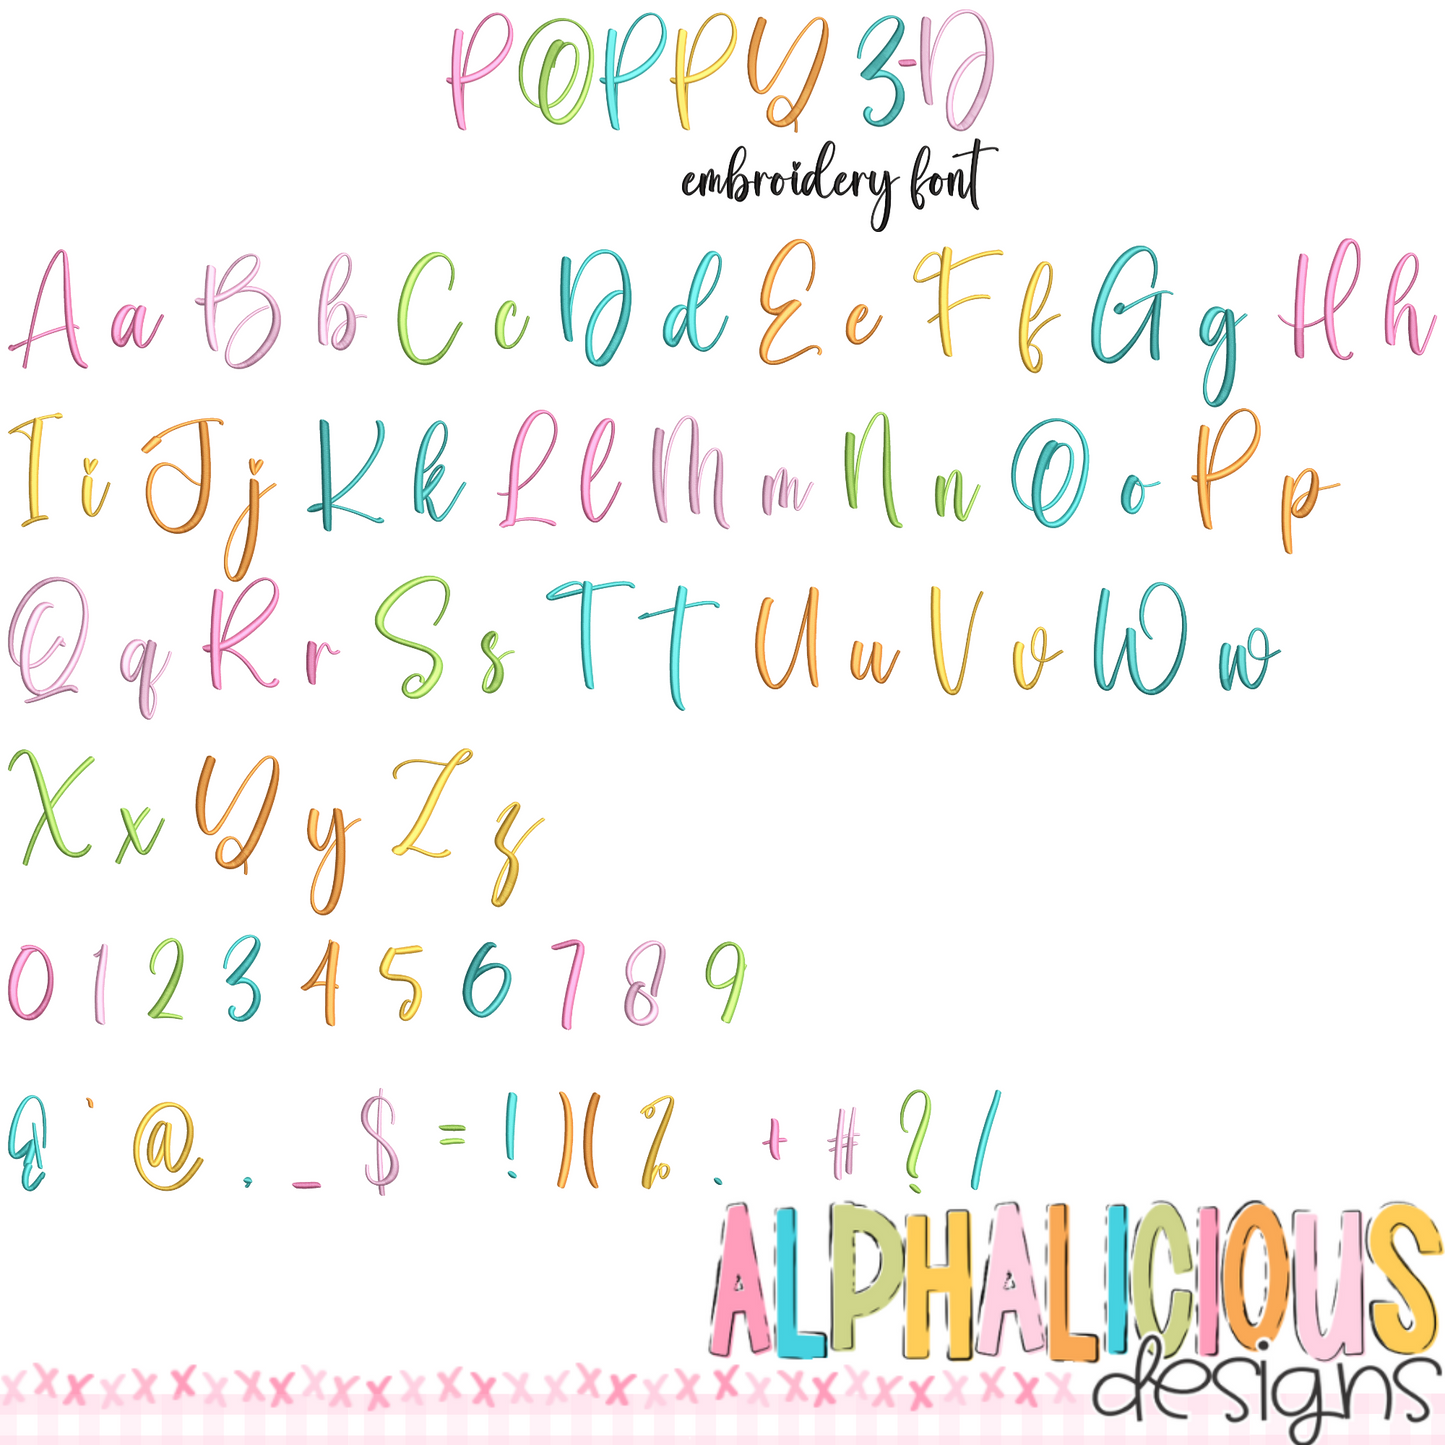 Poppy 3-D Embroidery Font